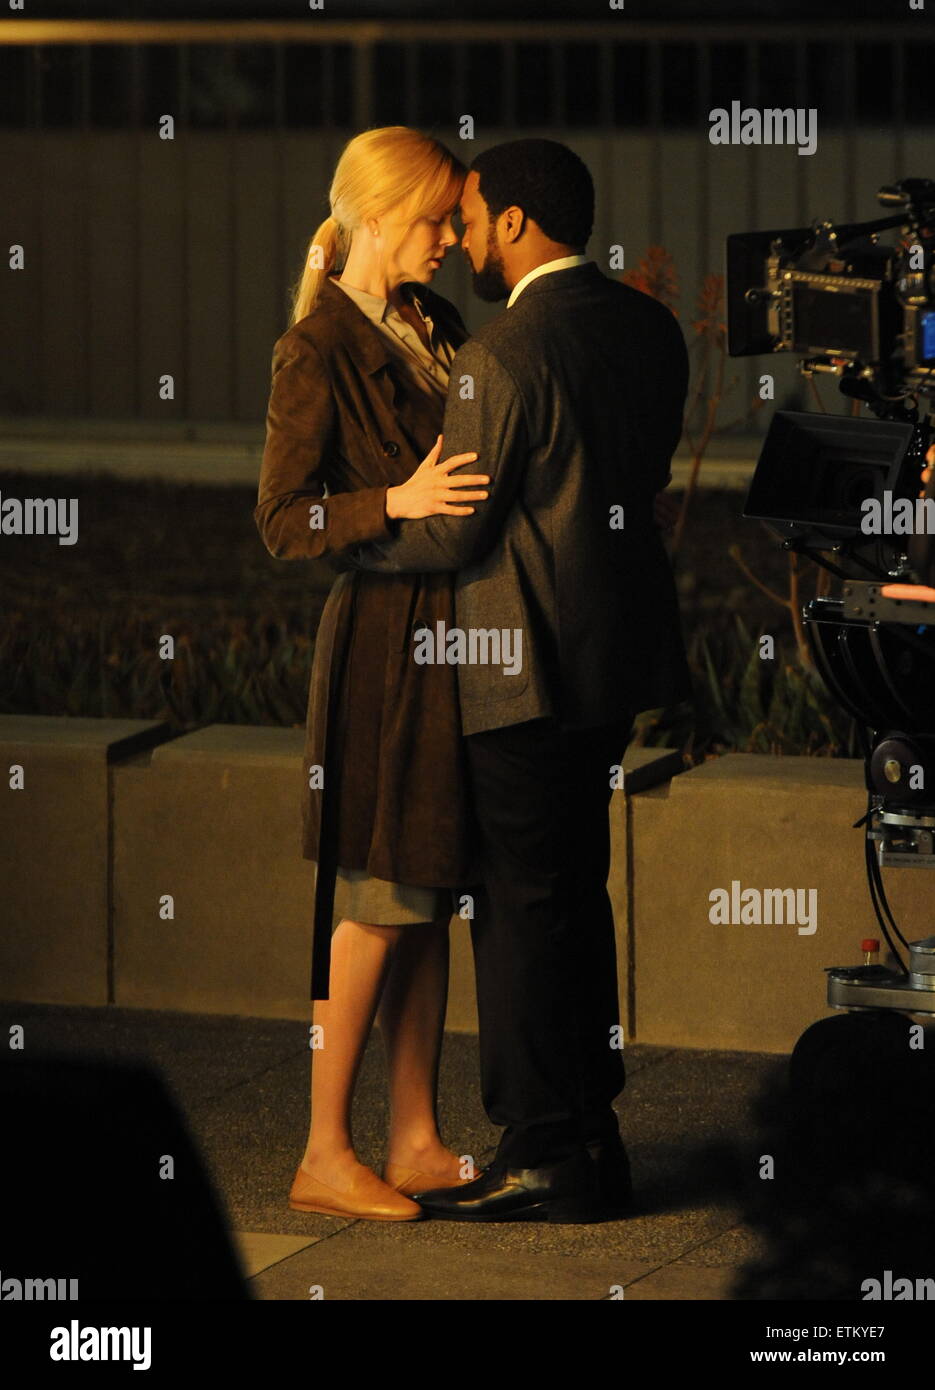 Actress Nicole Kidman filming late night scenes for 'The Secret In their Eyes' with co star Chiwetel Ejiofor in downtown Los Angeles. The couple gets emotional after witnessing a car reck and starts kissing in the middle of the street.  Featuring: Nicole Kidman, Chiwetel Ejiofor Where: Los Angeles, California, United States When: 10 Mar 2015 Credit: Cousart/JFXimages/WENN.com Stock Photo